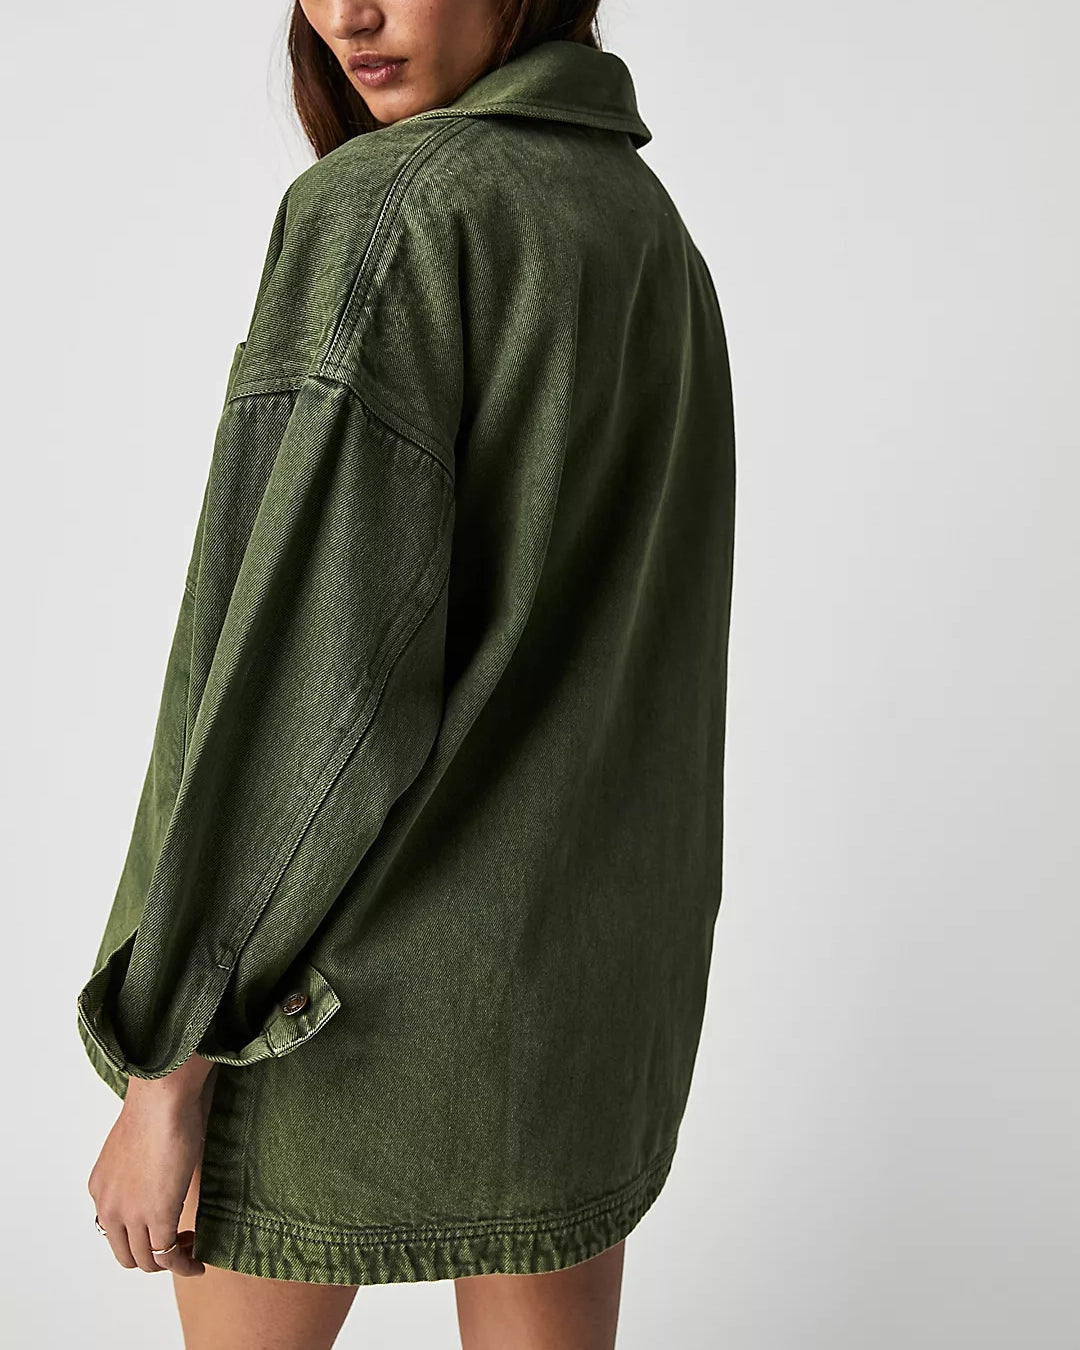 Madison City Twill Jacket by Free People